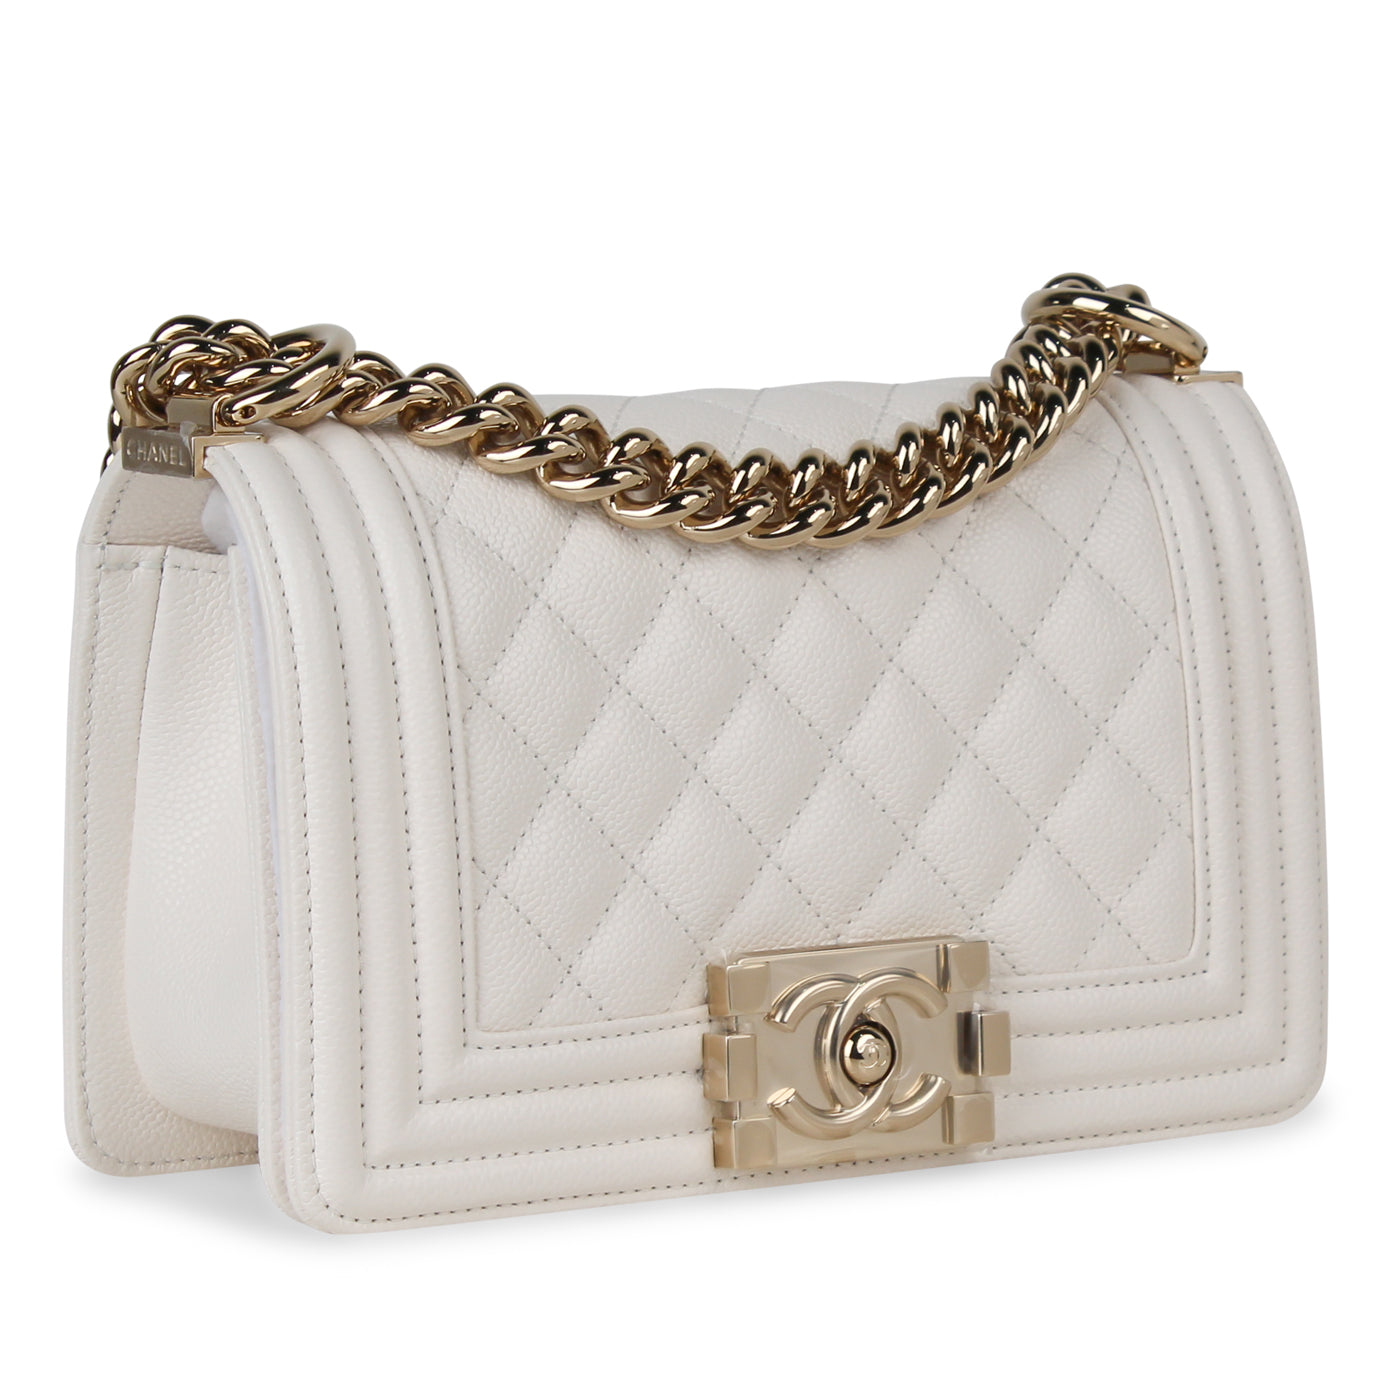 CHANEL, Bags, Chanel Small Boy Bag White Wgold